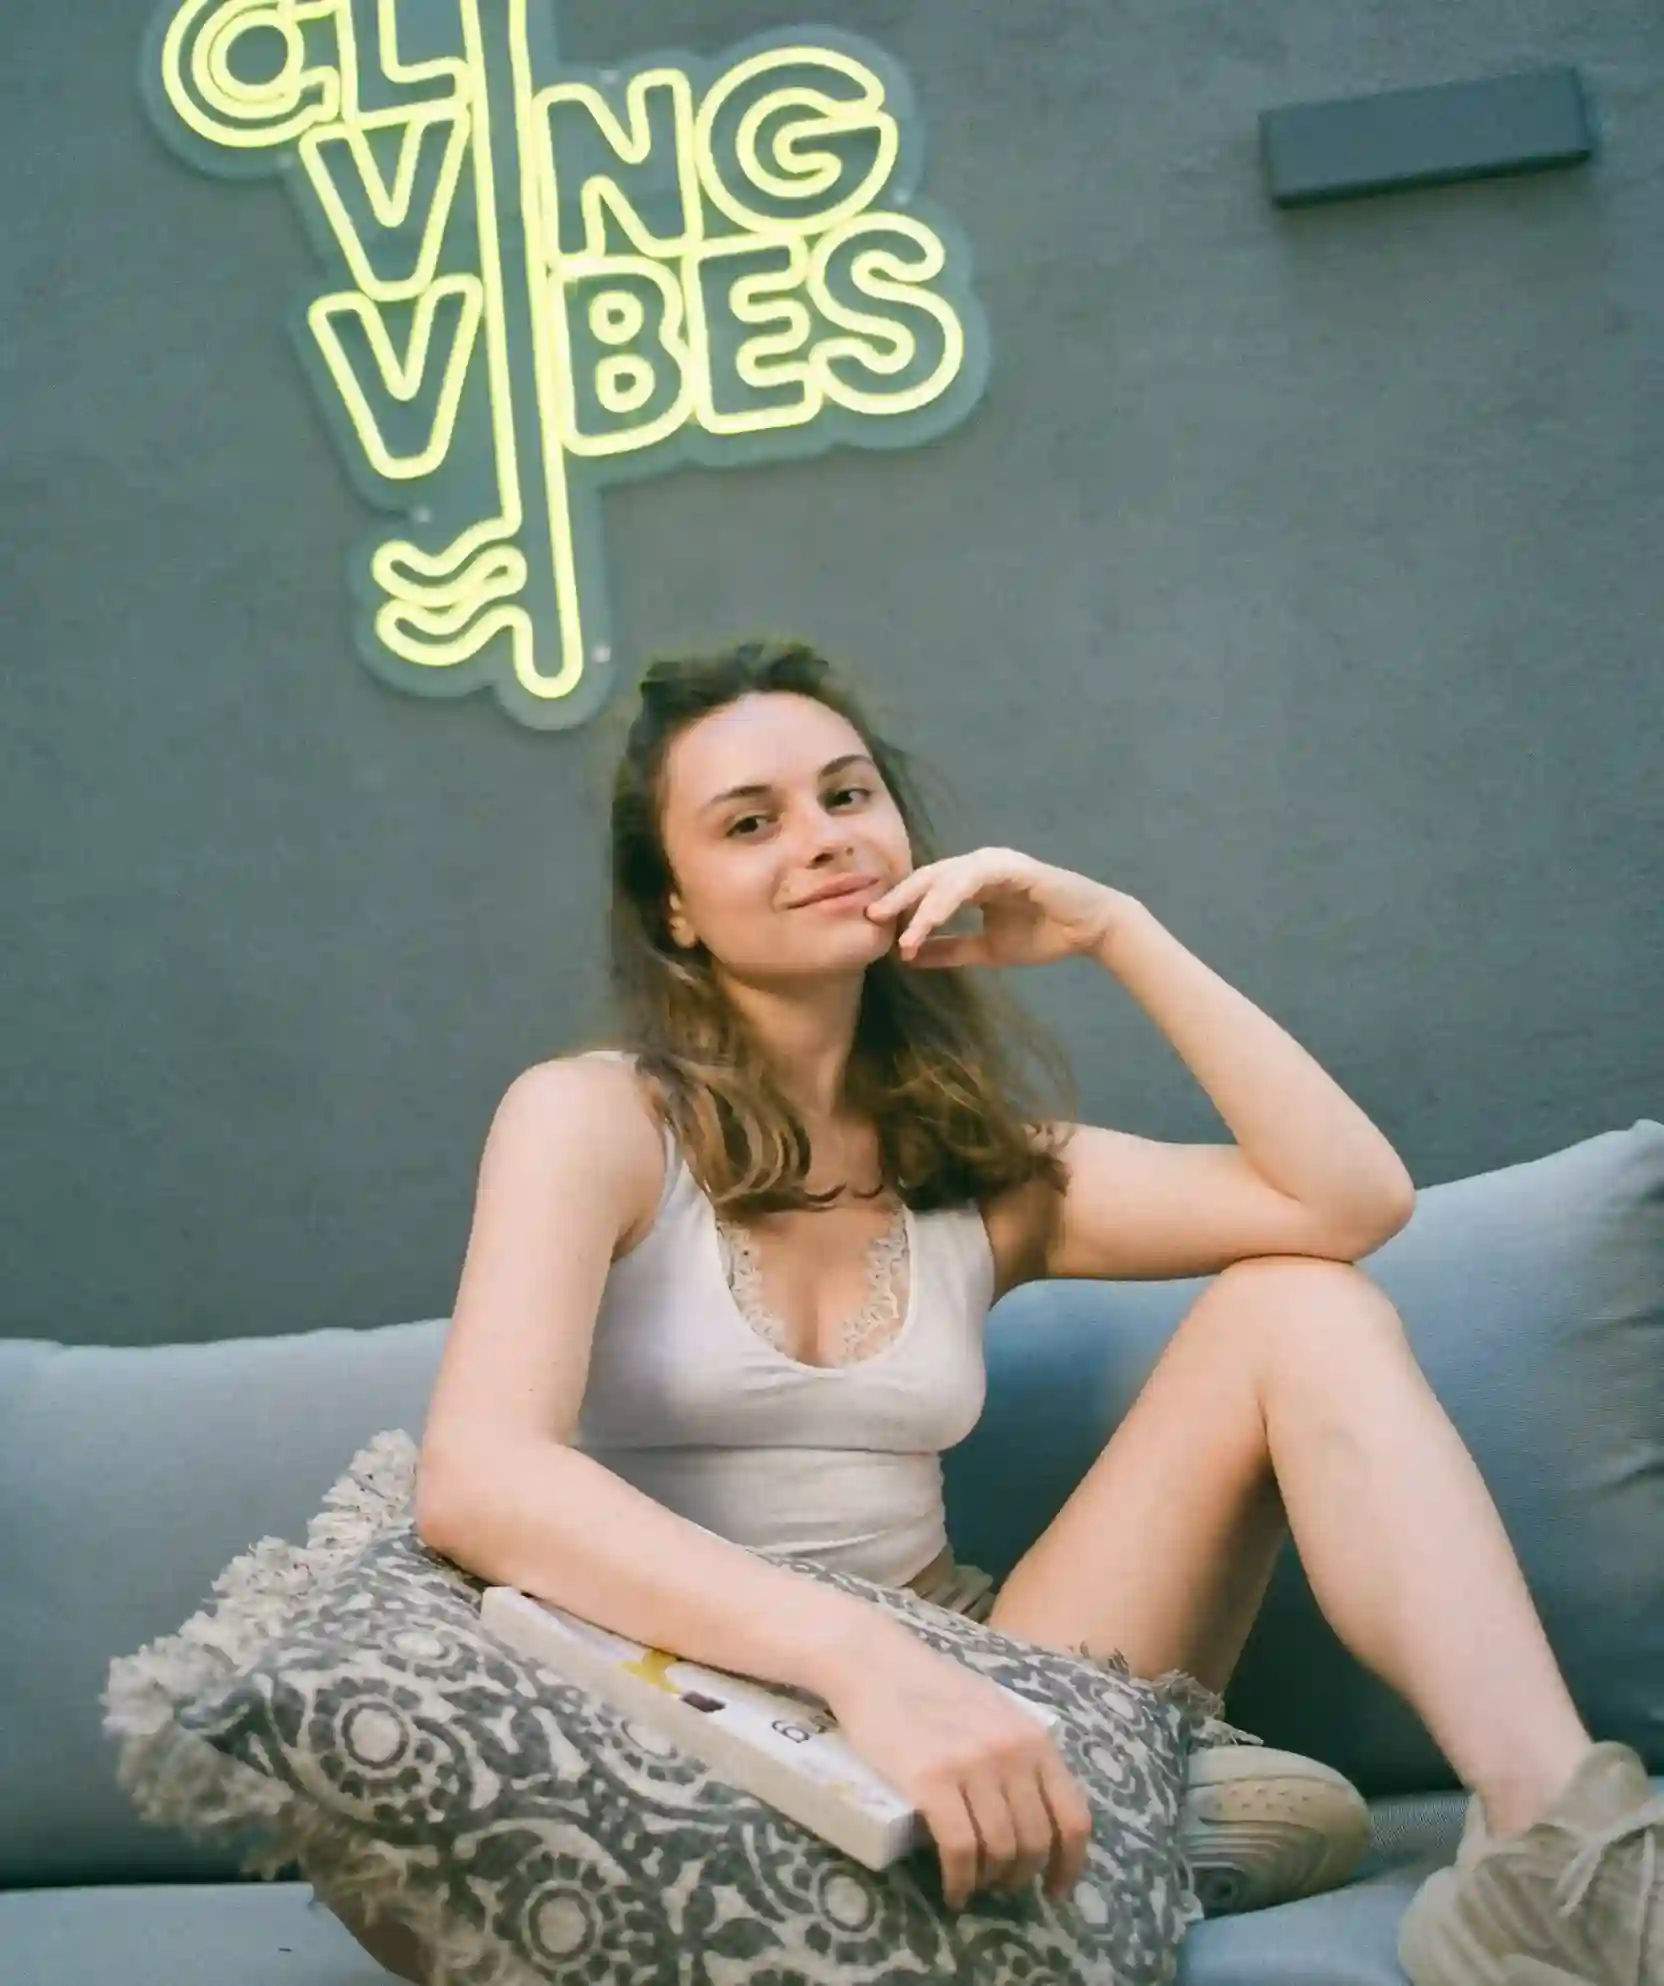 coliving vibes model